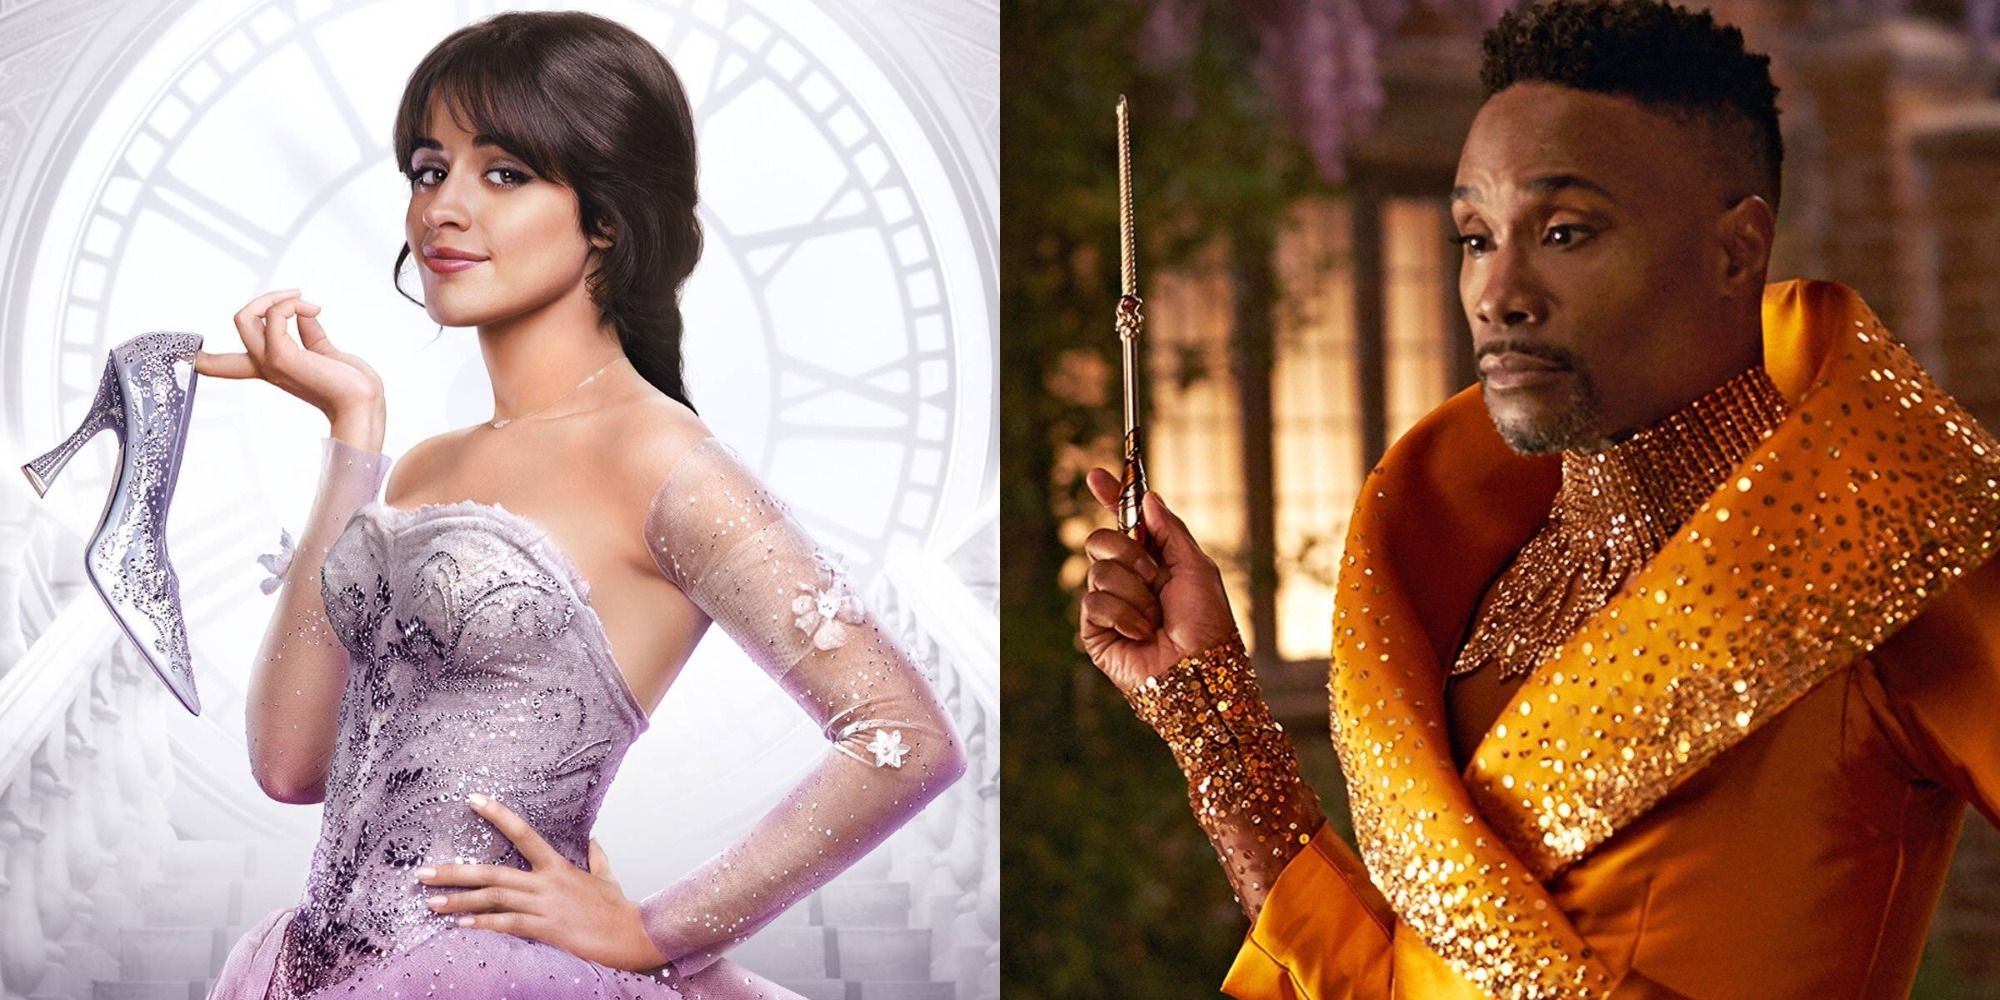 Split image of Camila Cabello and Billy Porter from Cinderella